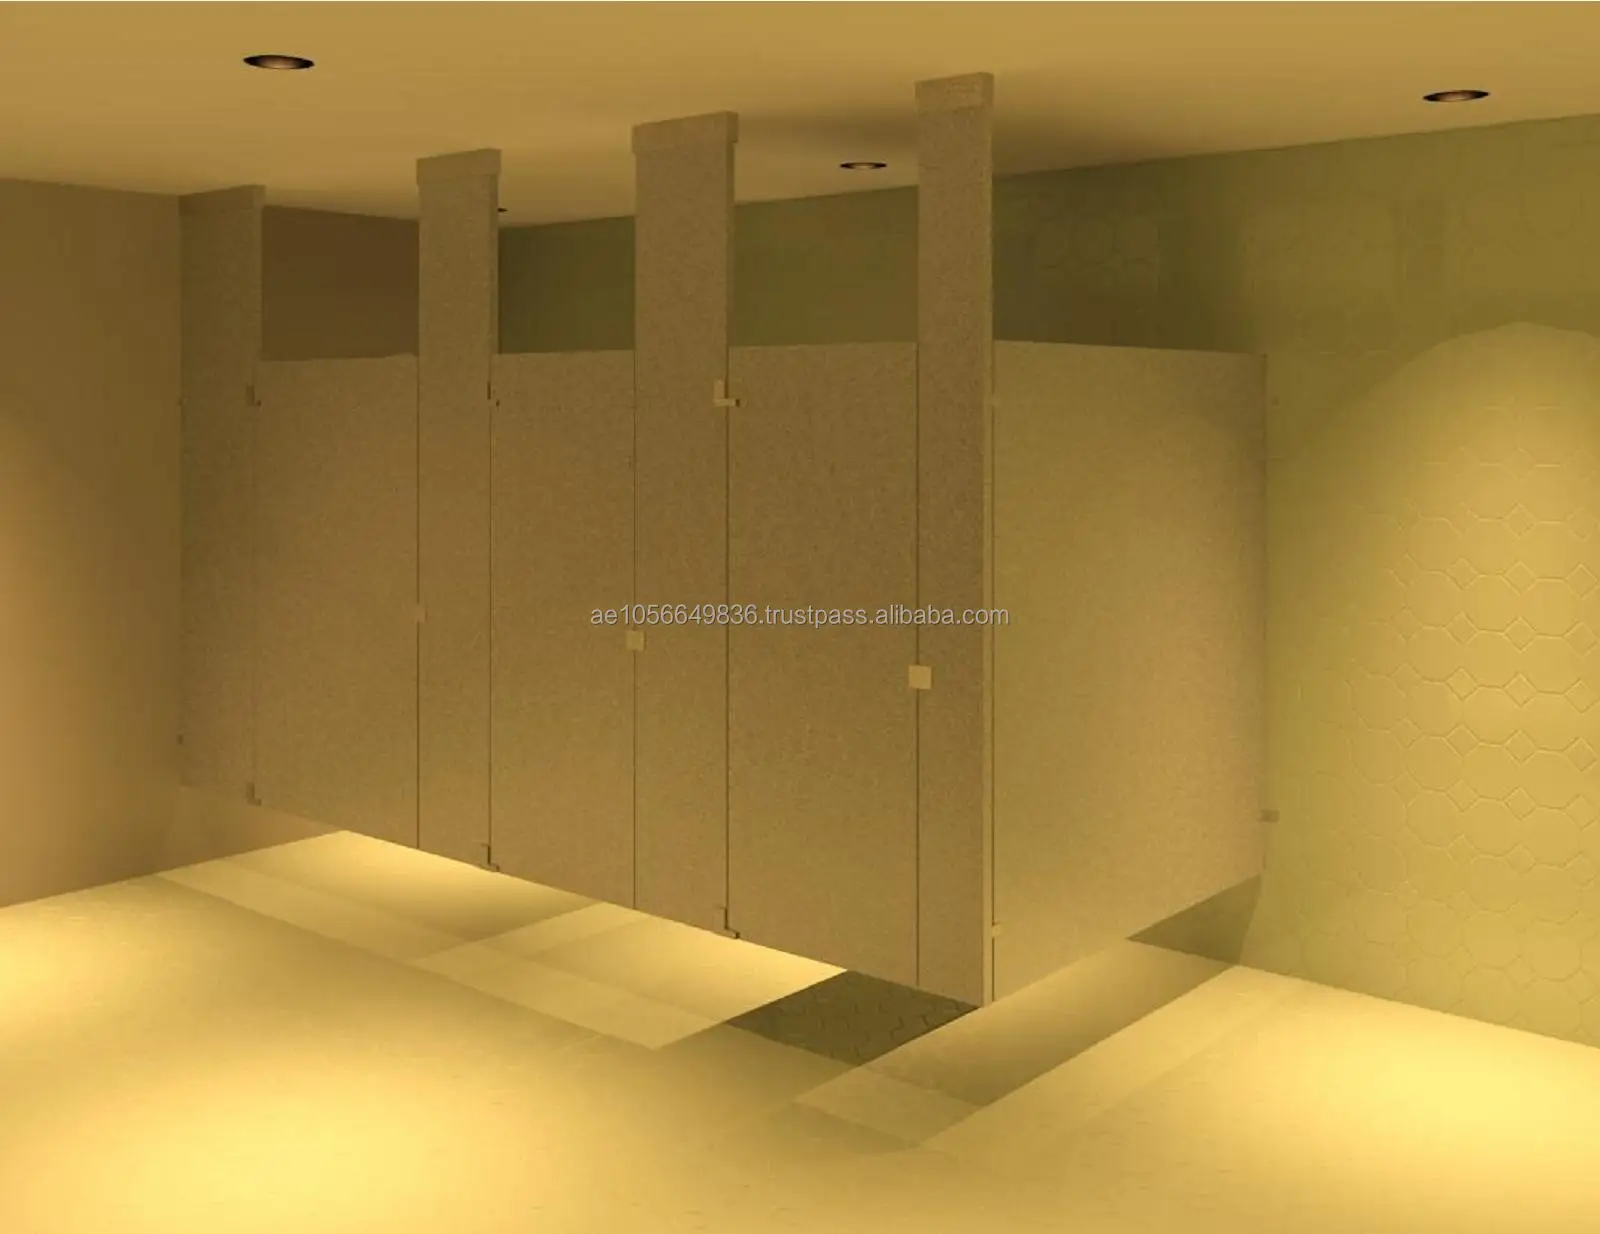 Ceiling Hung Toilet Cubicle Buy Toilet Cubicle Toilet Cubicles Toilet Partition Product On Alibaba Com